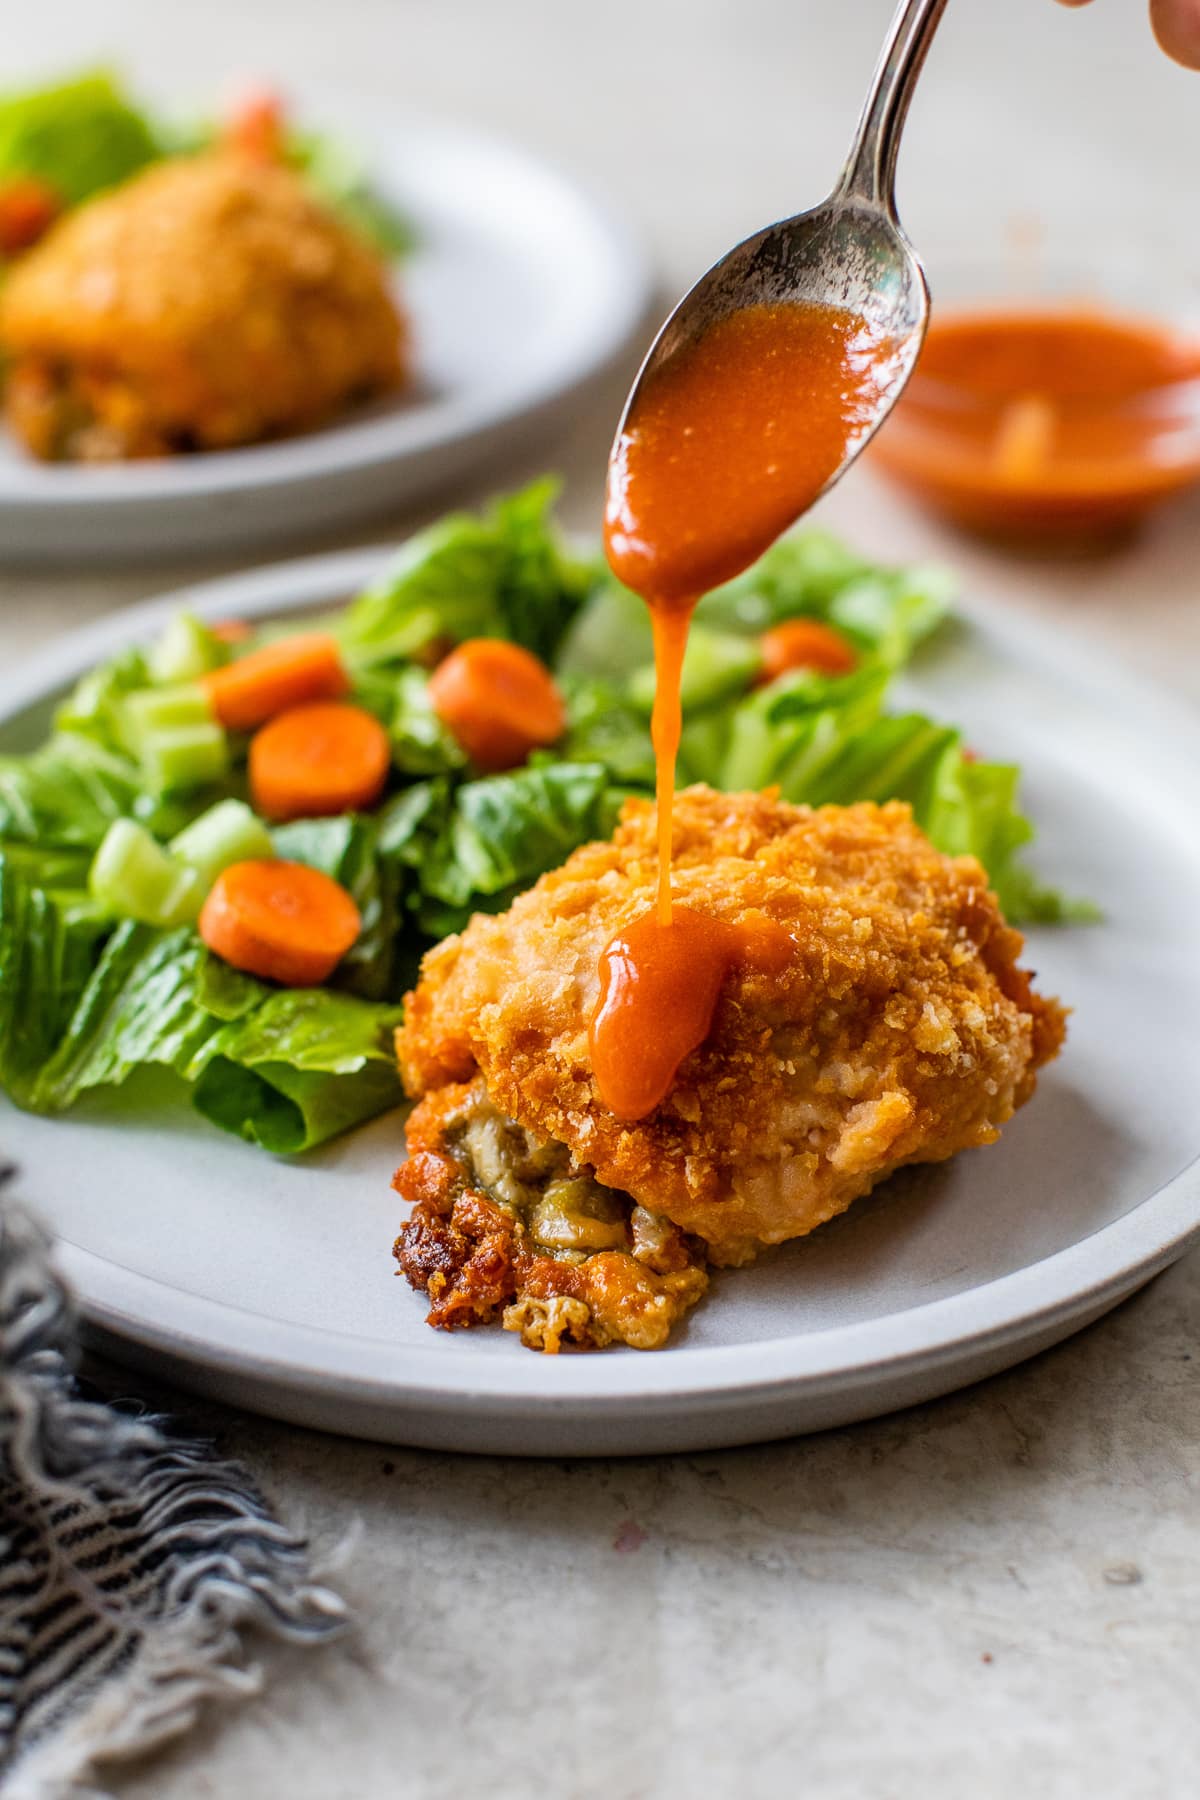 drizzling hot sauce over stuffed chicken breast